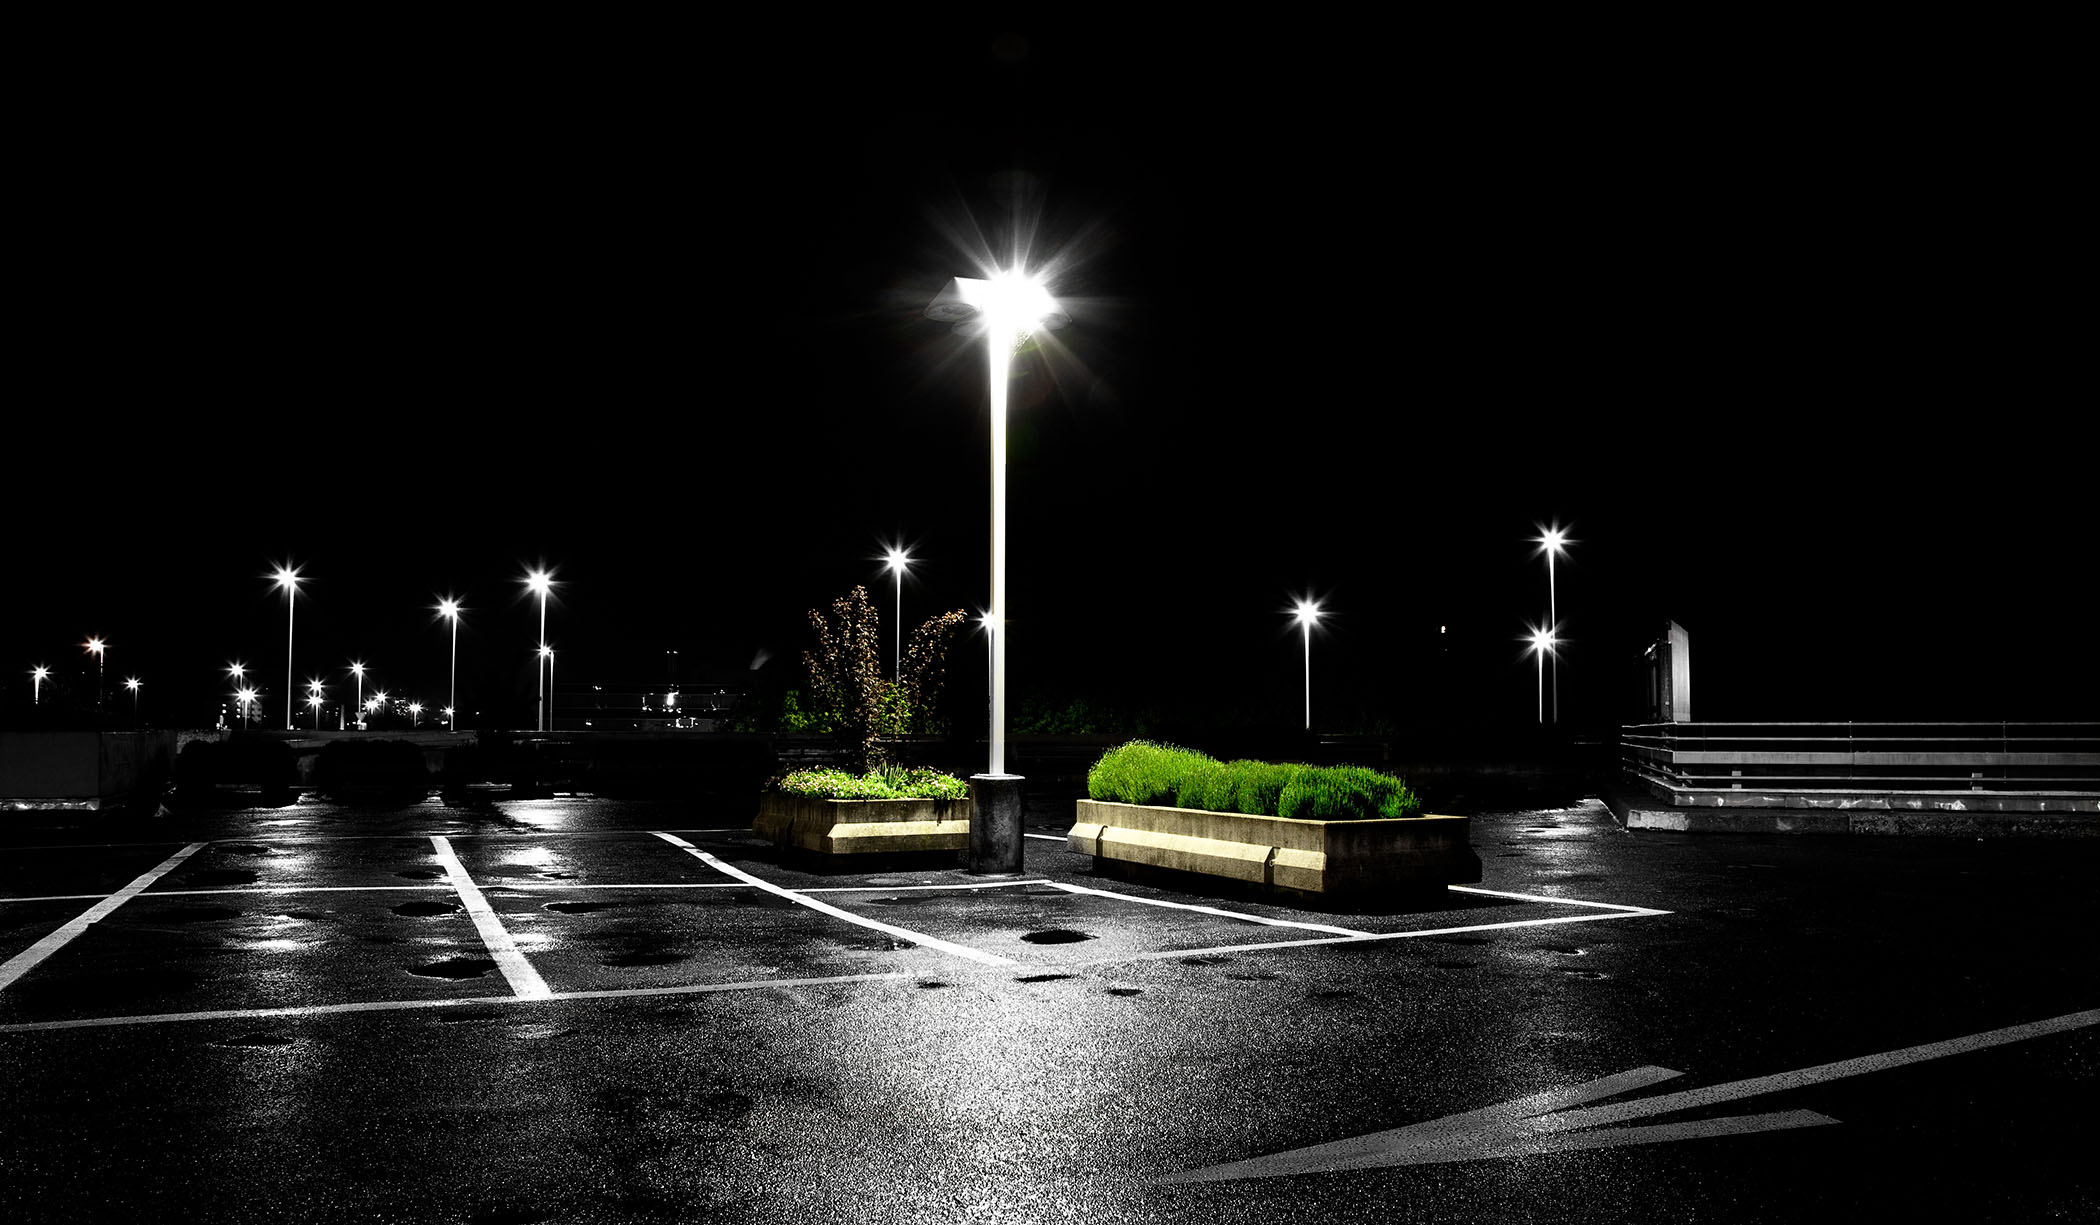 Parking lot lighting installed by electricians